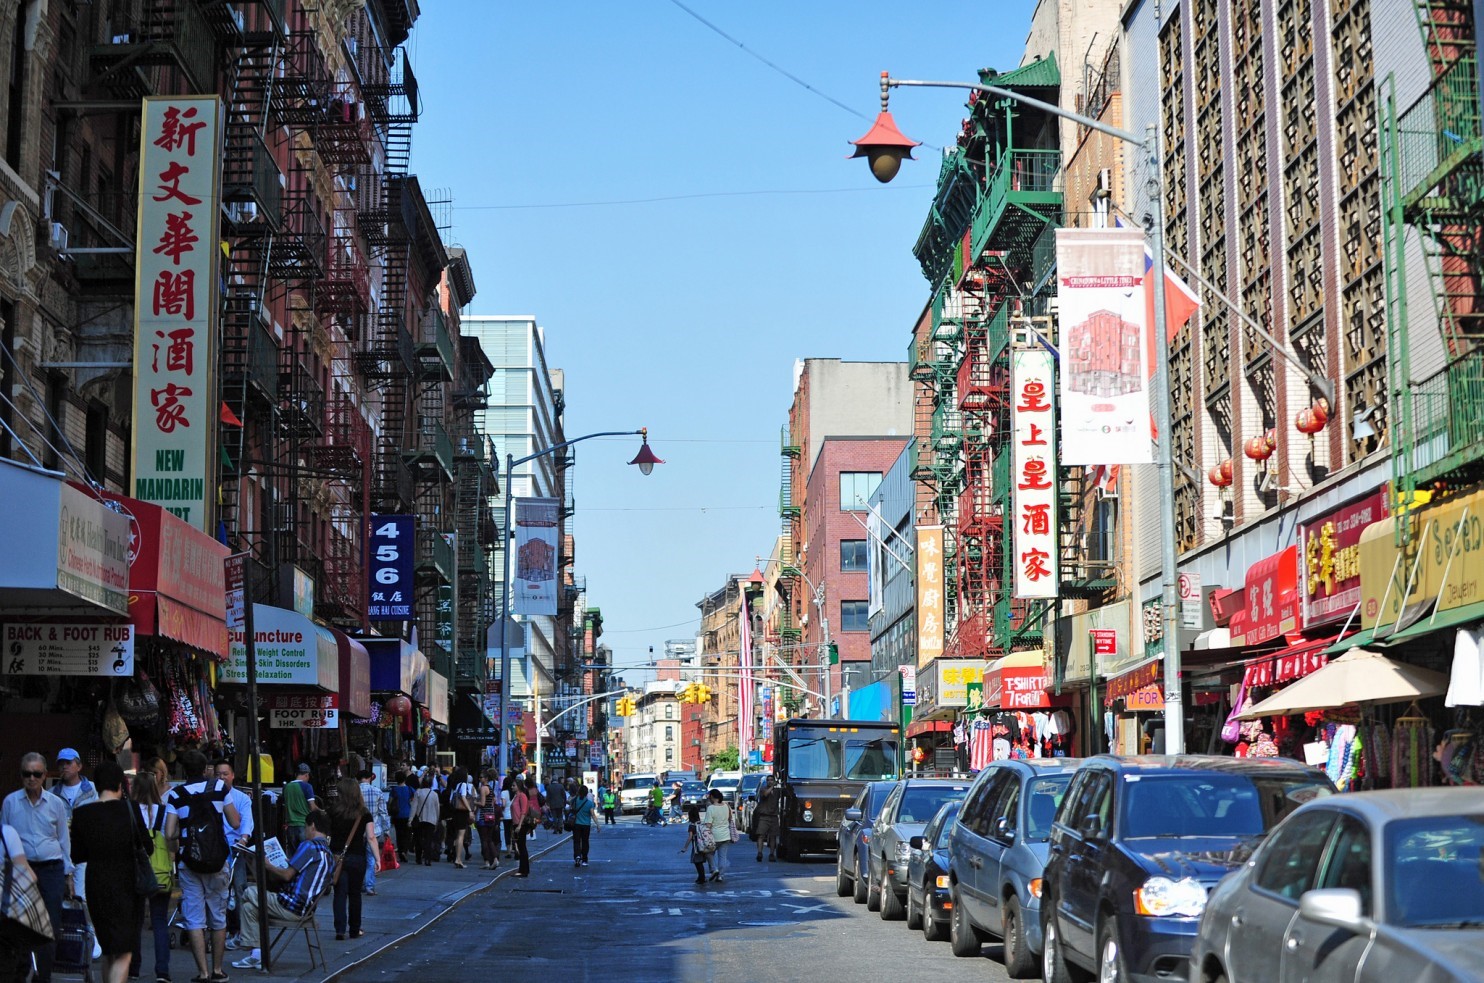 New York's Chinatown, courtesy of Flickr user Heather Paul, under a Creative Commons license.